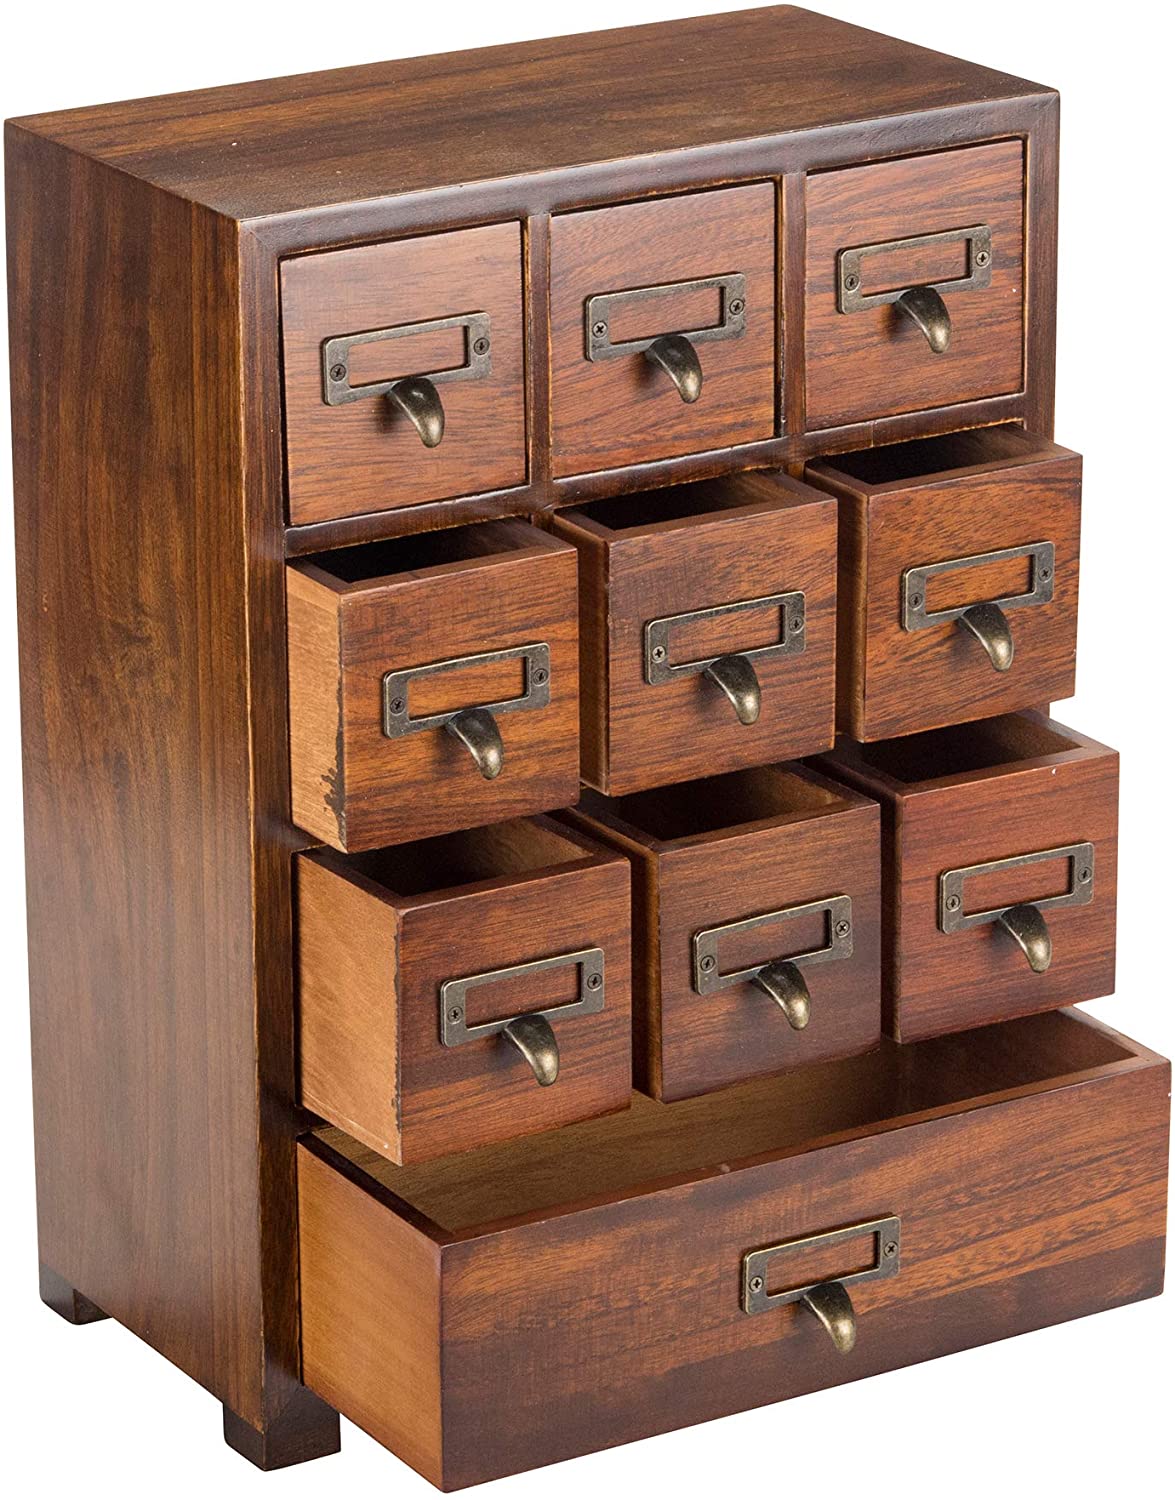 60 Best Wooden Cabinet Options For Your Office | Storables